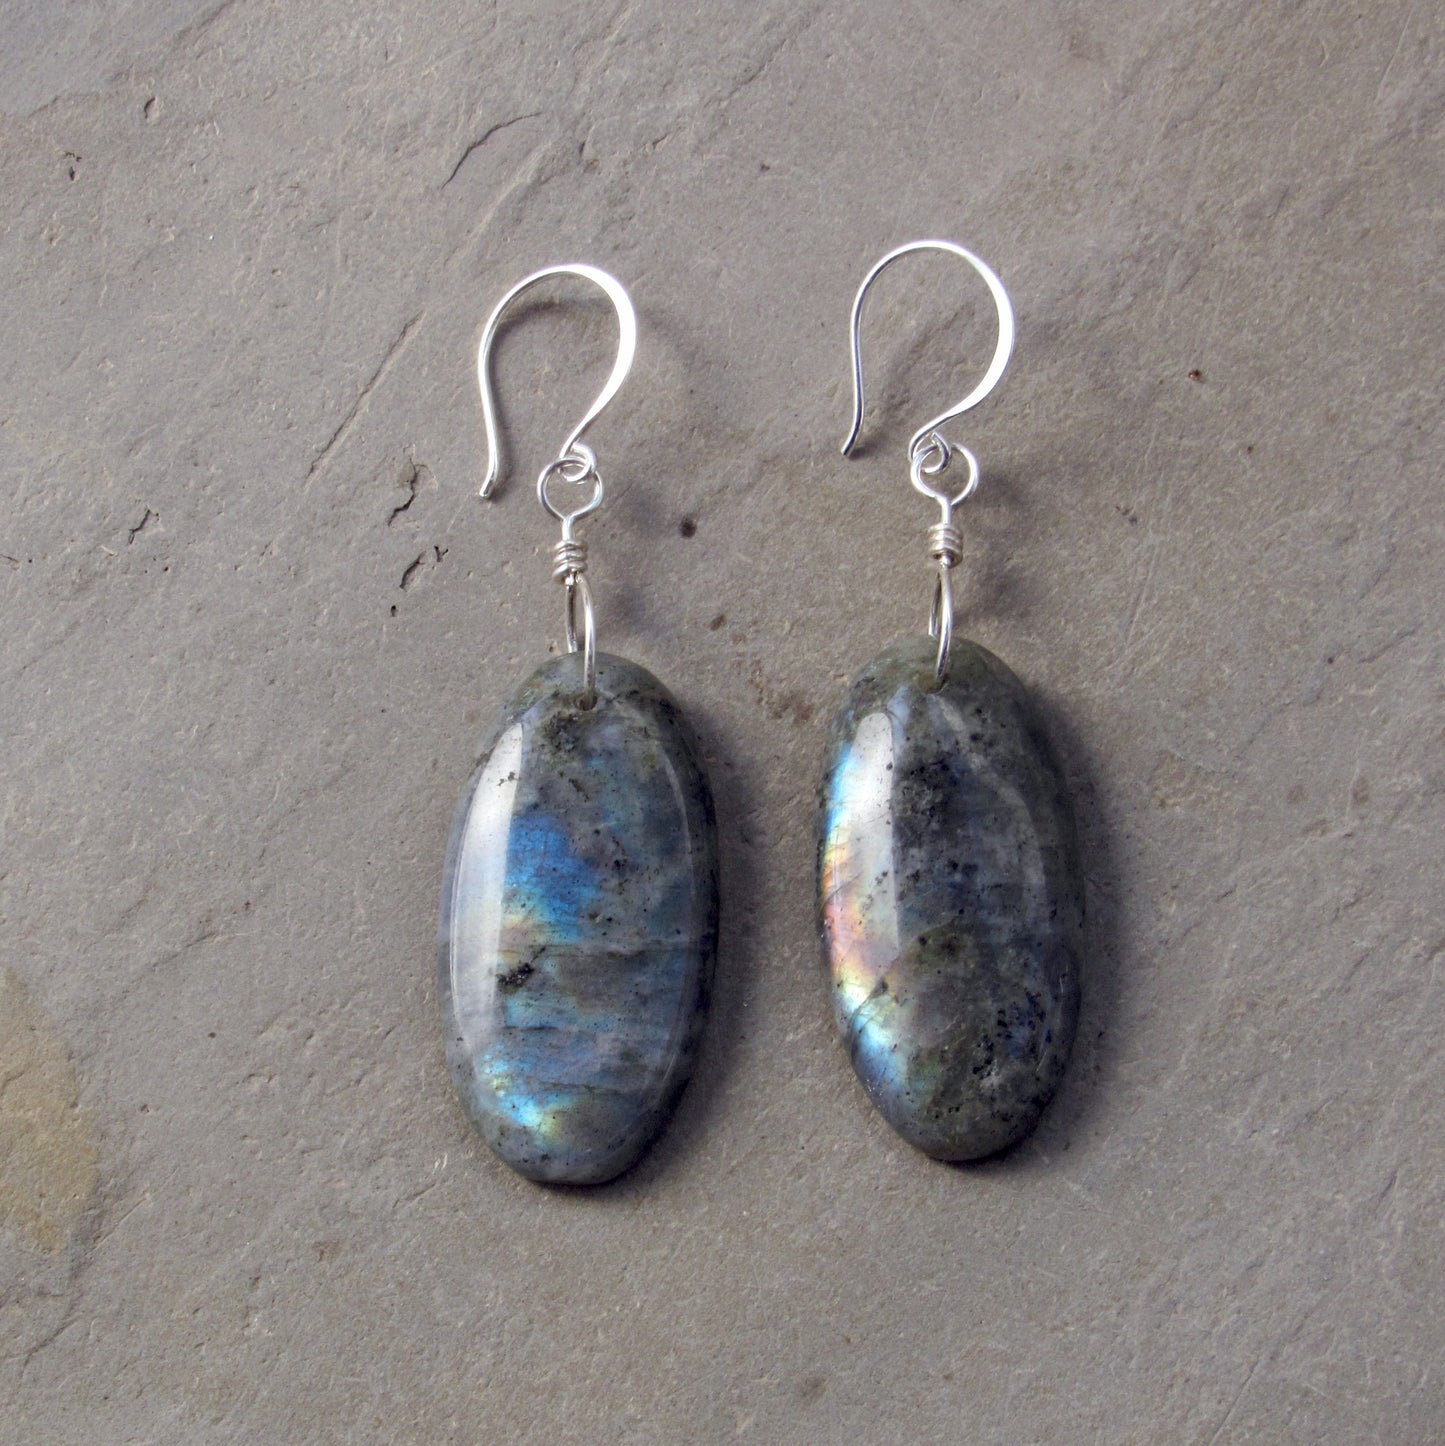 Labradorite Gemstones Hand Wrapped with Sterling Silver Drop Earrings